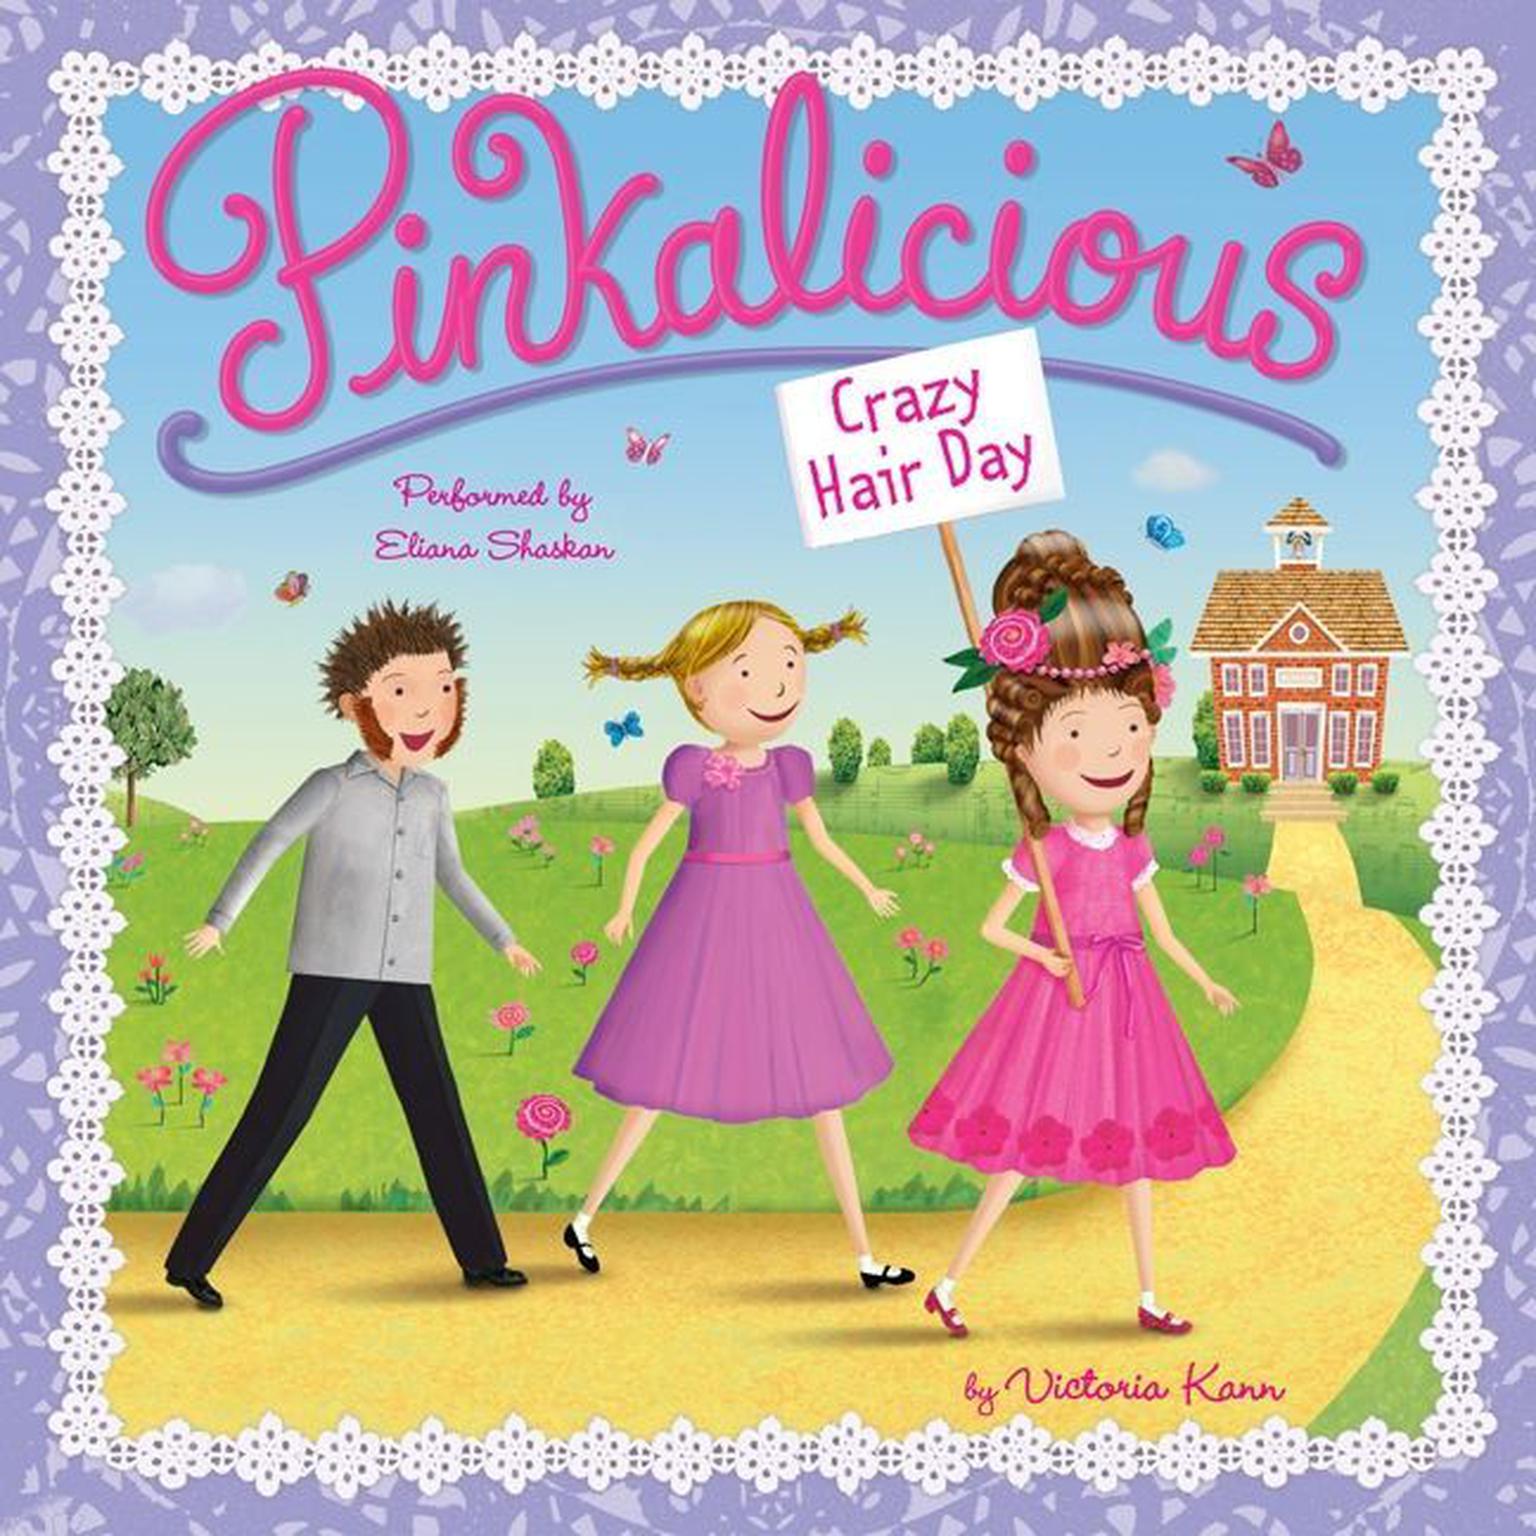 Pinkalicious: Crazy Hair Day Audiobook, by Victoria Kann